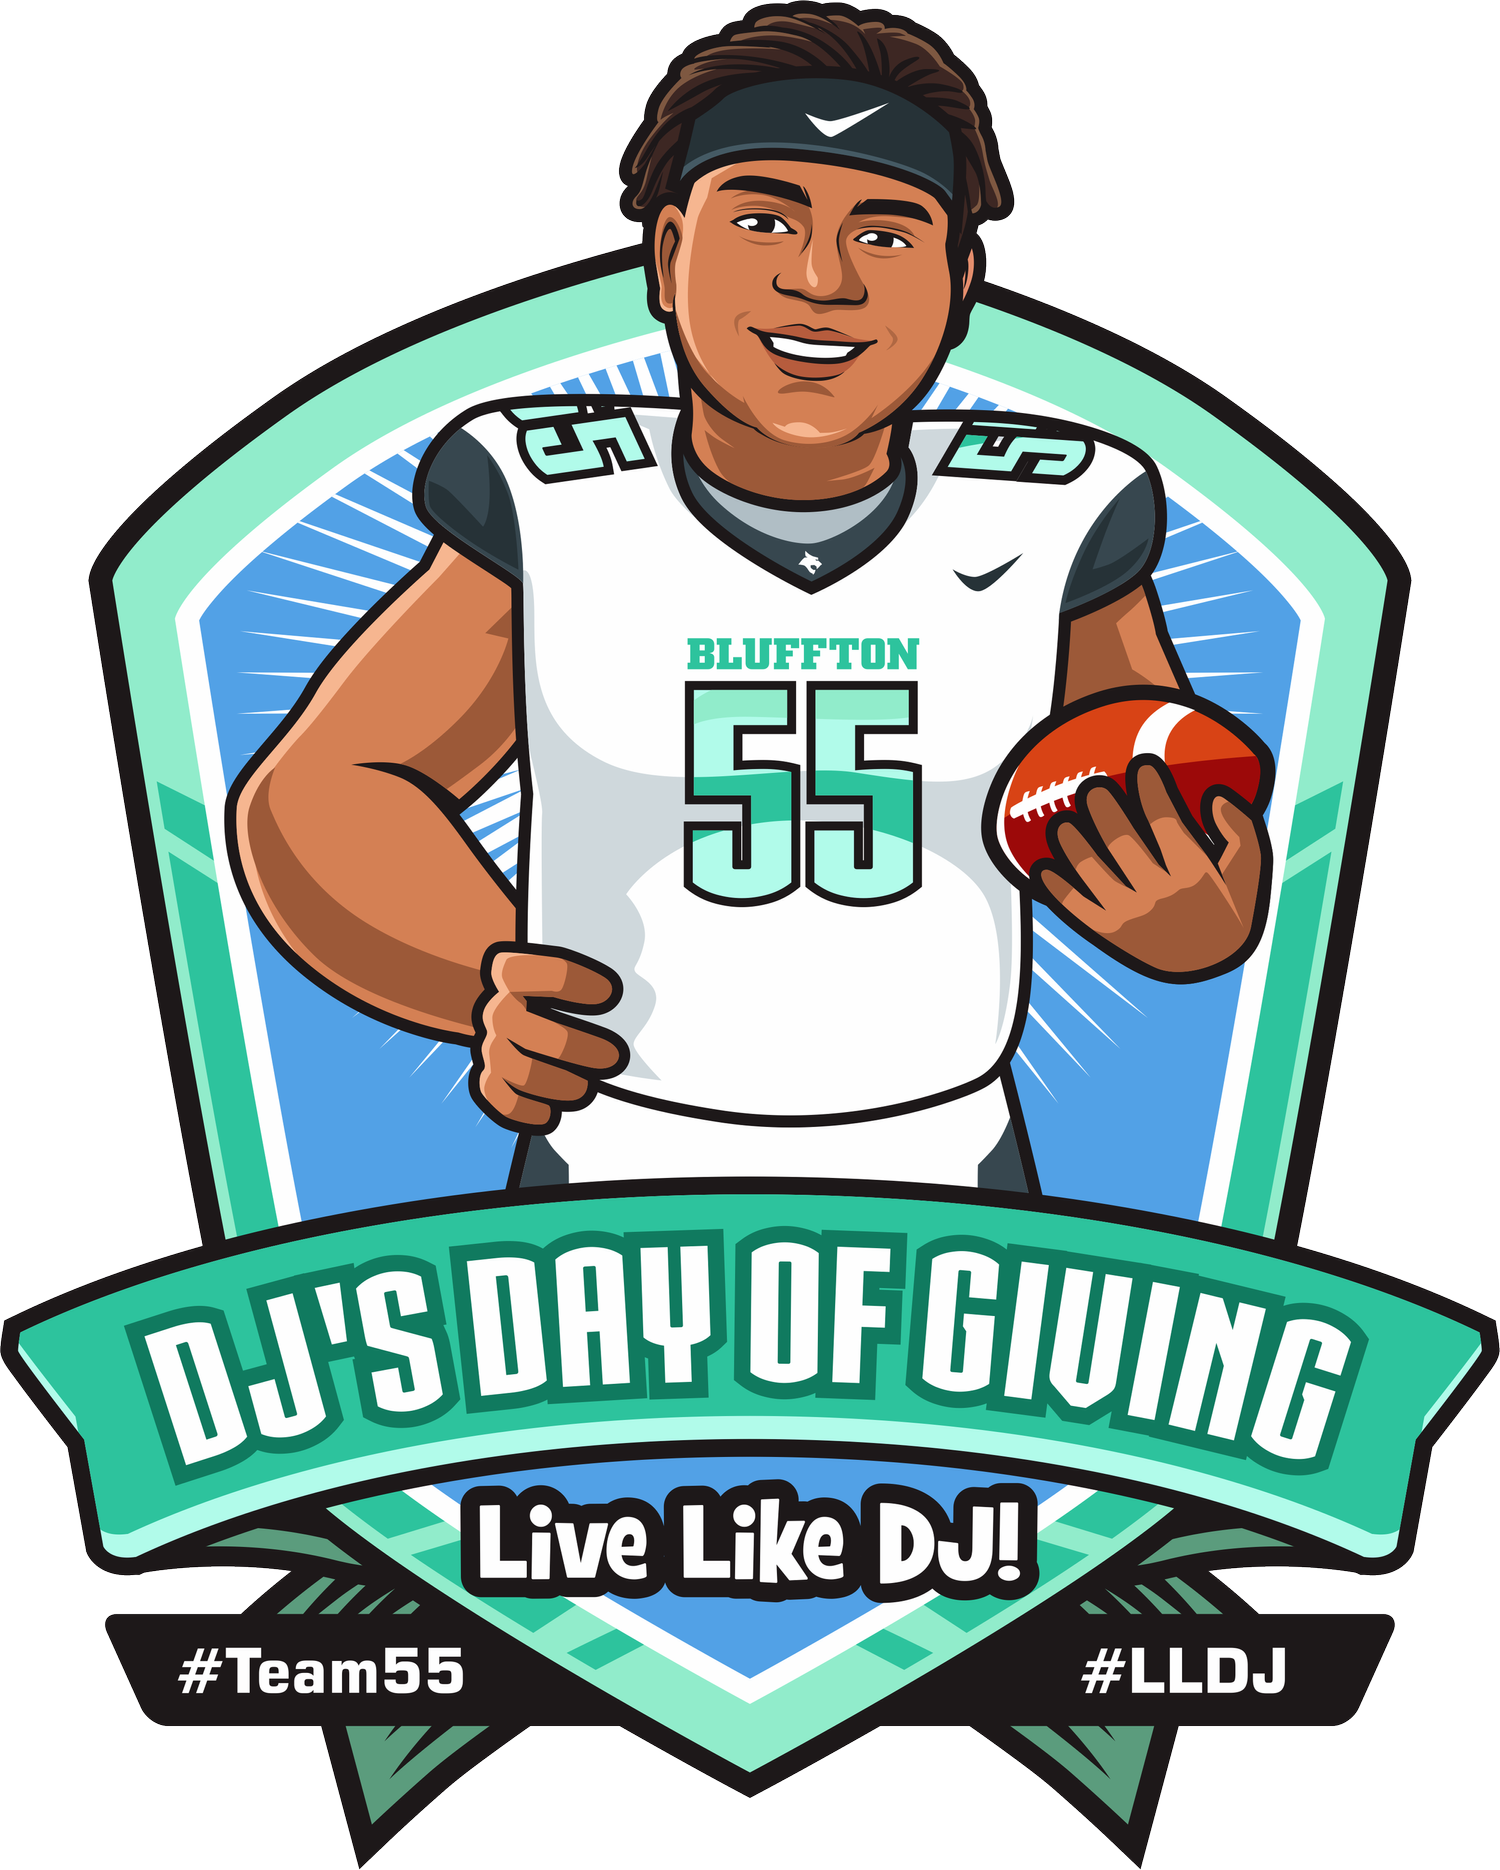 DJ&#39;s Day of Giving